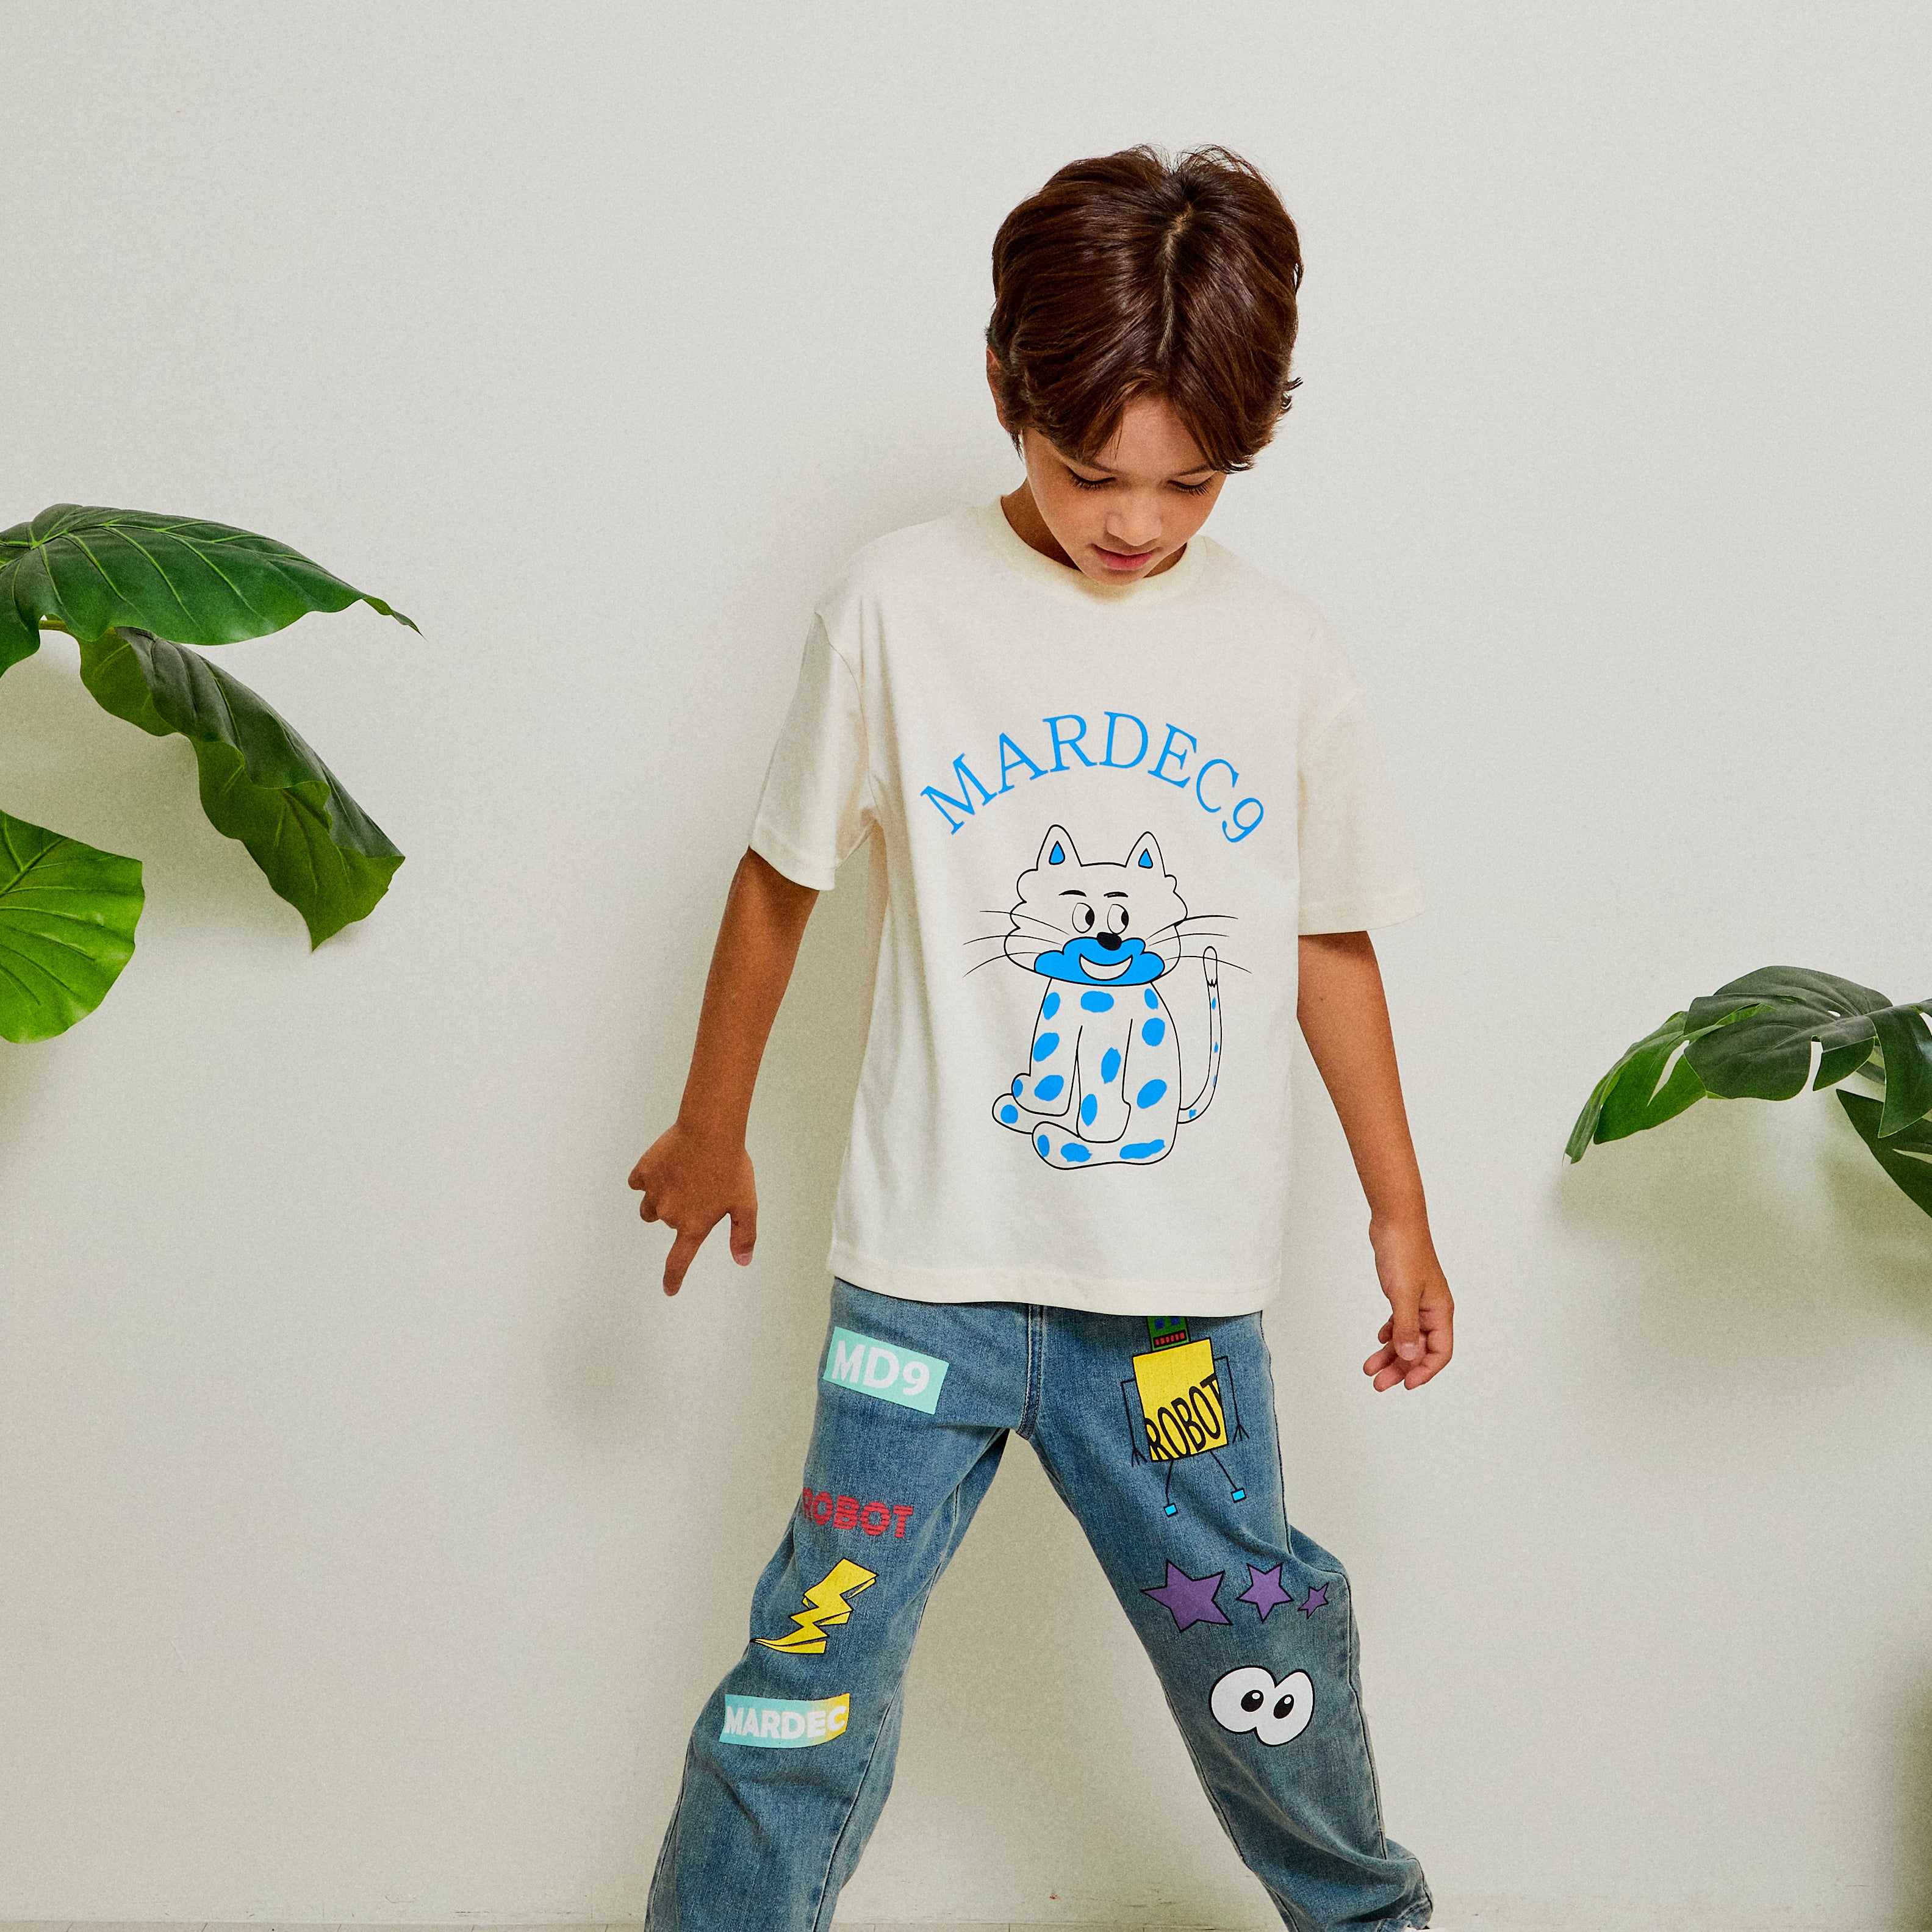 Funny Cat T-shirt & Robot and Friends Jeans - Your Go-To for Fun Fashion